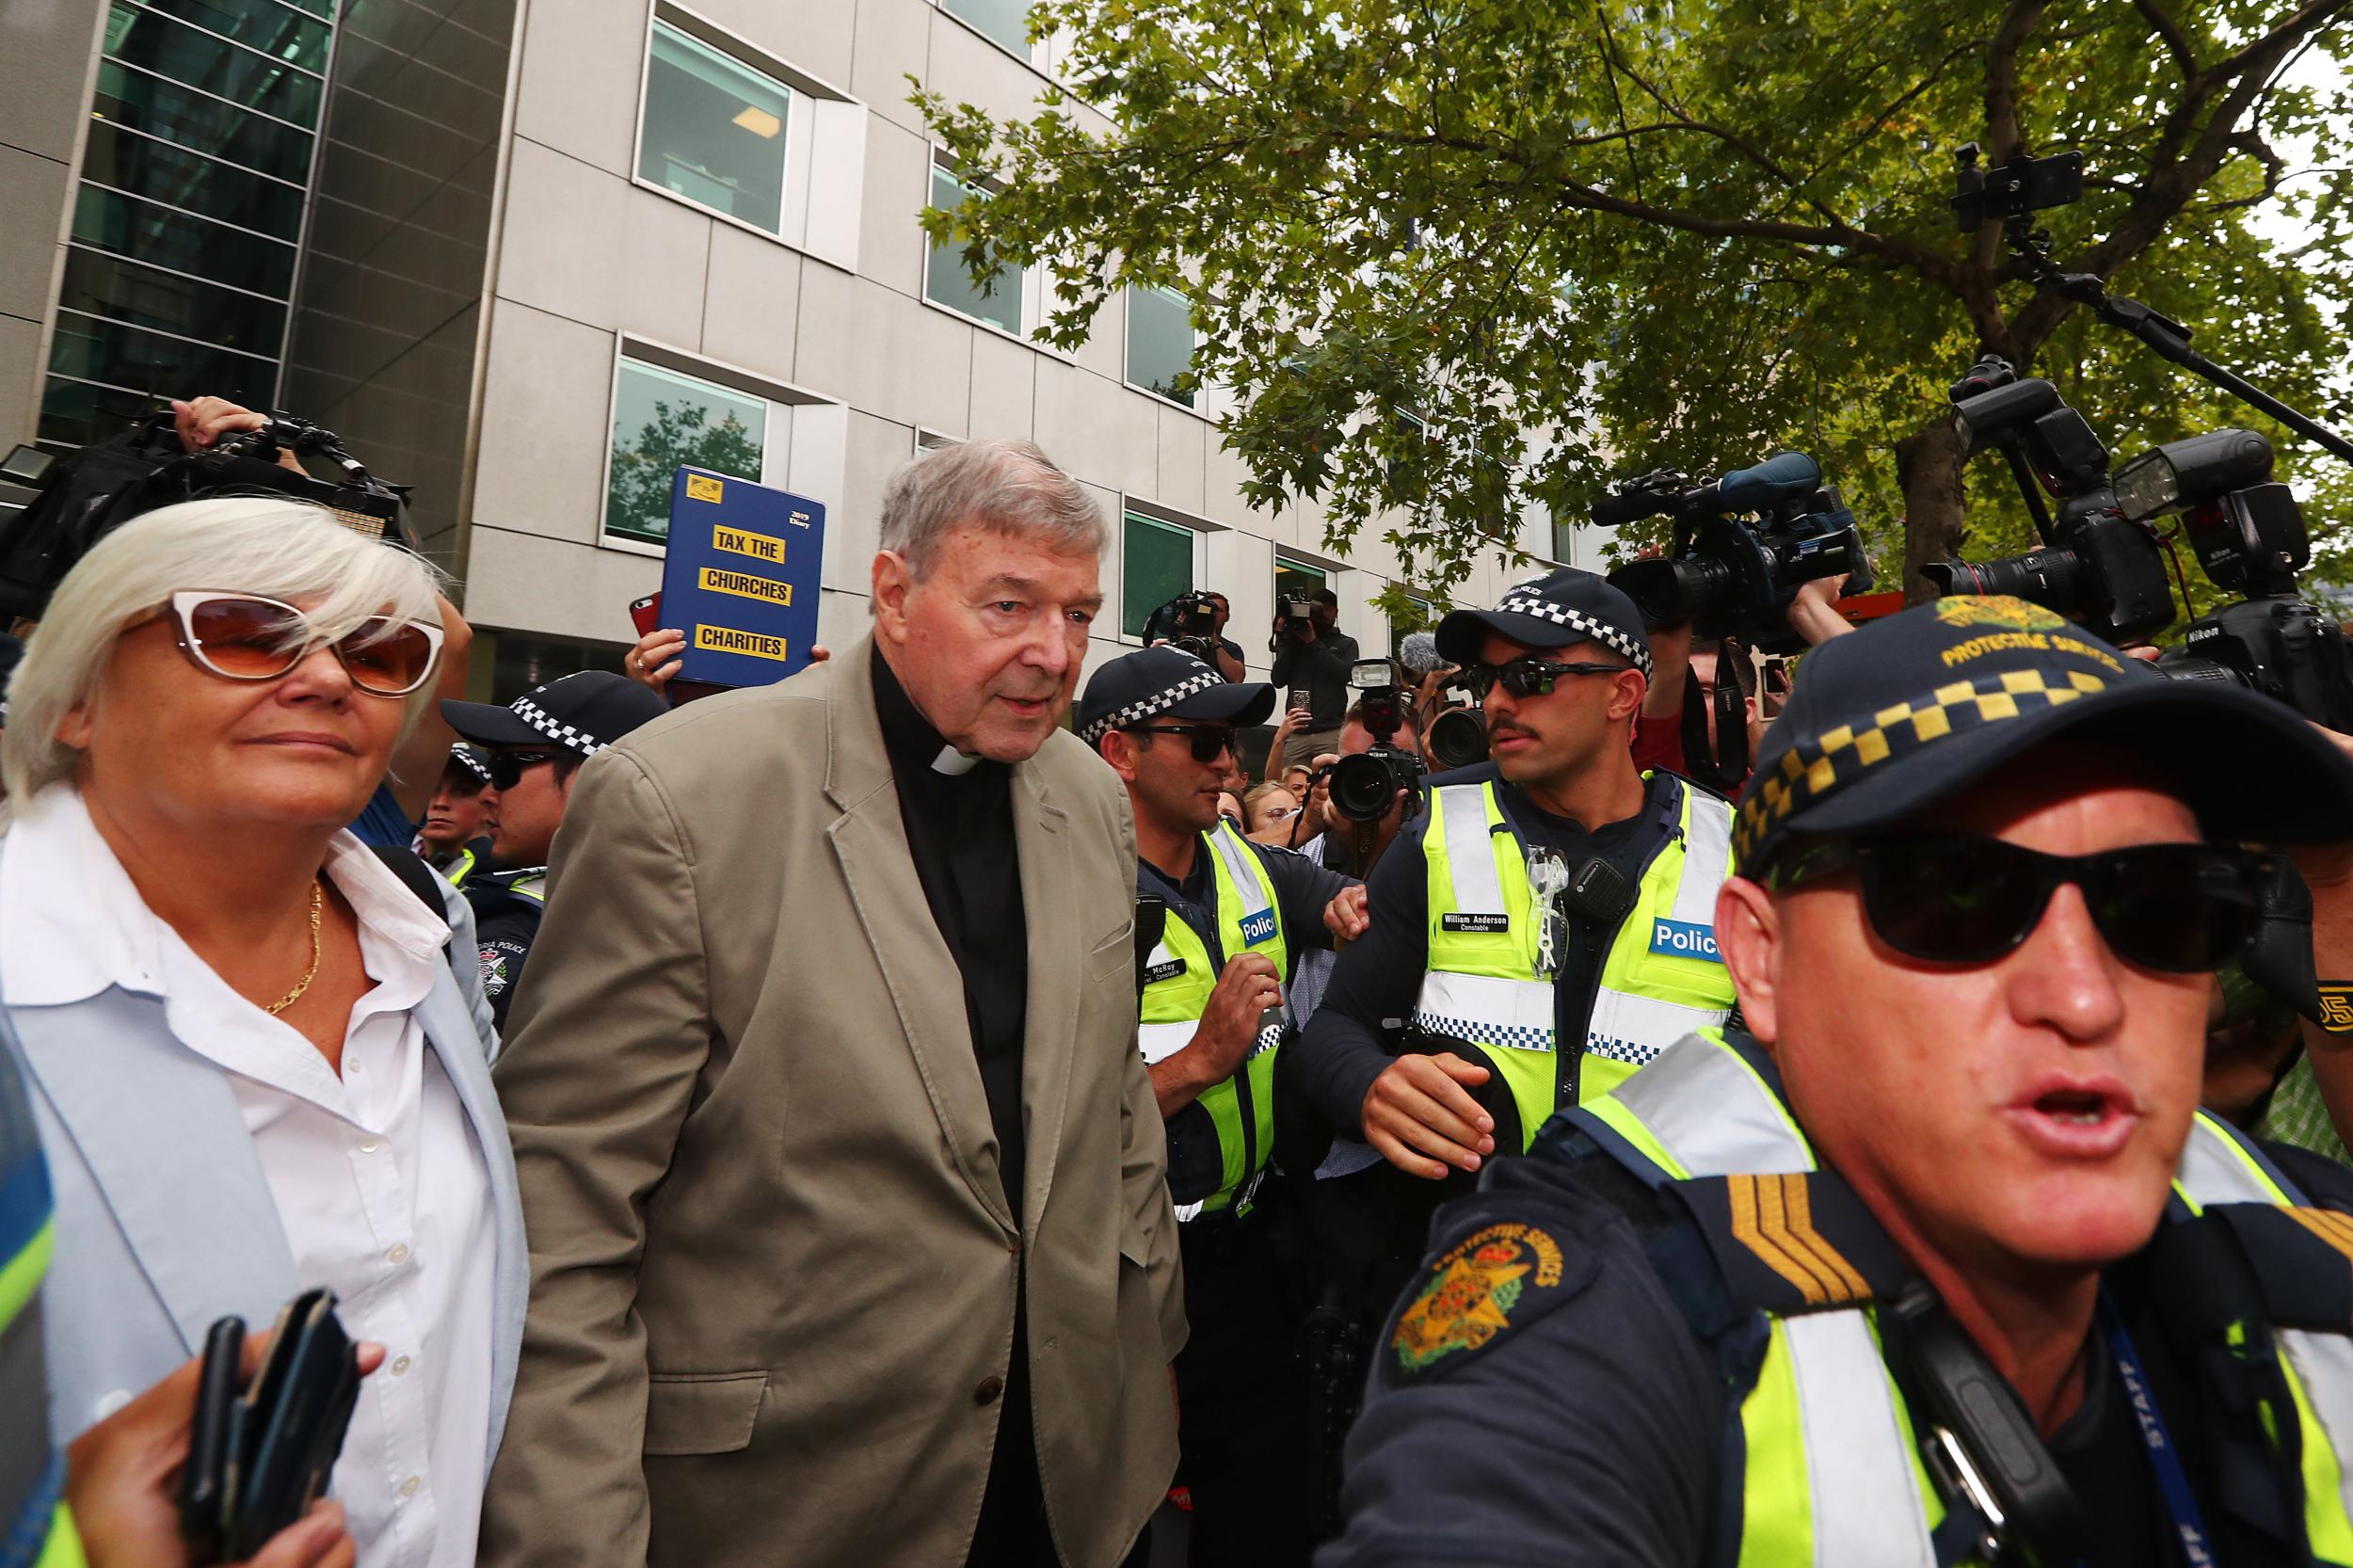 Cardinal George Pell leaves County Court in Melbourne on 26 February